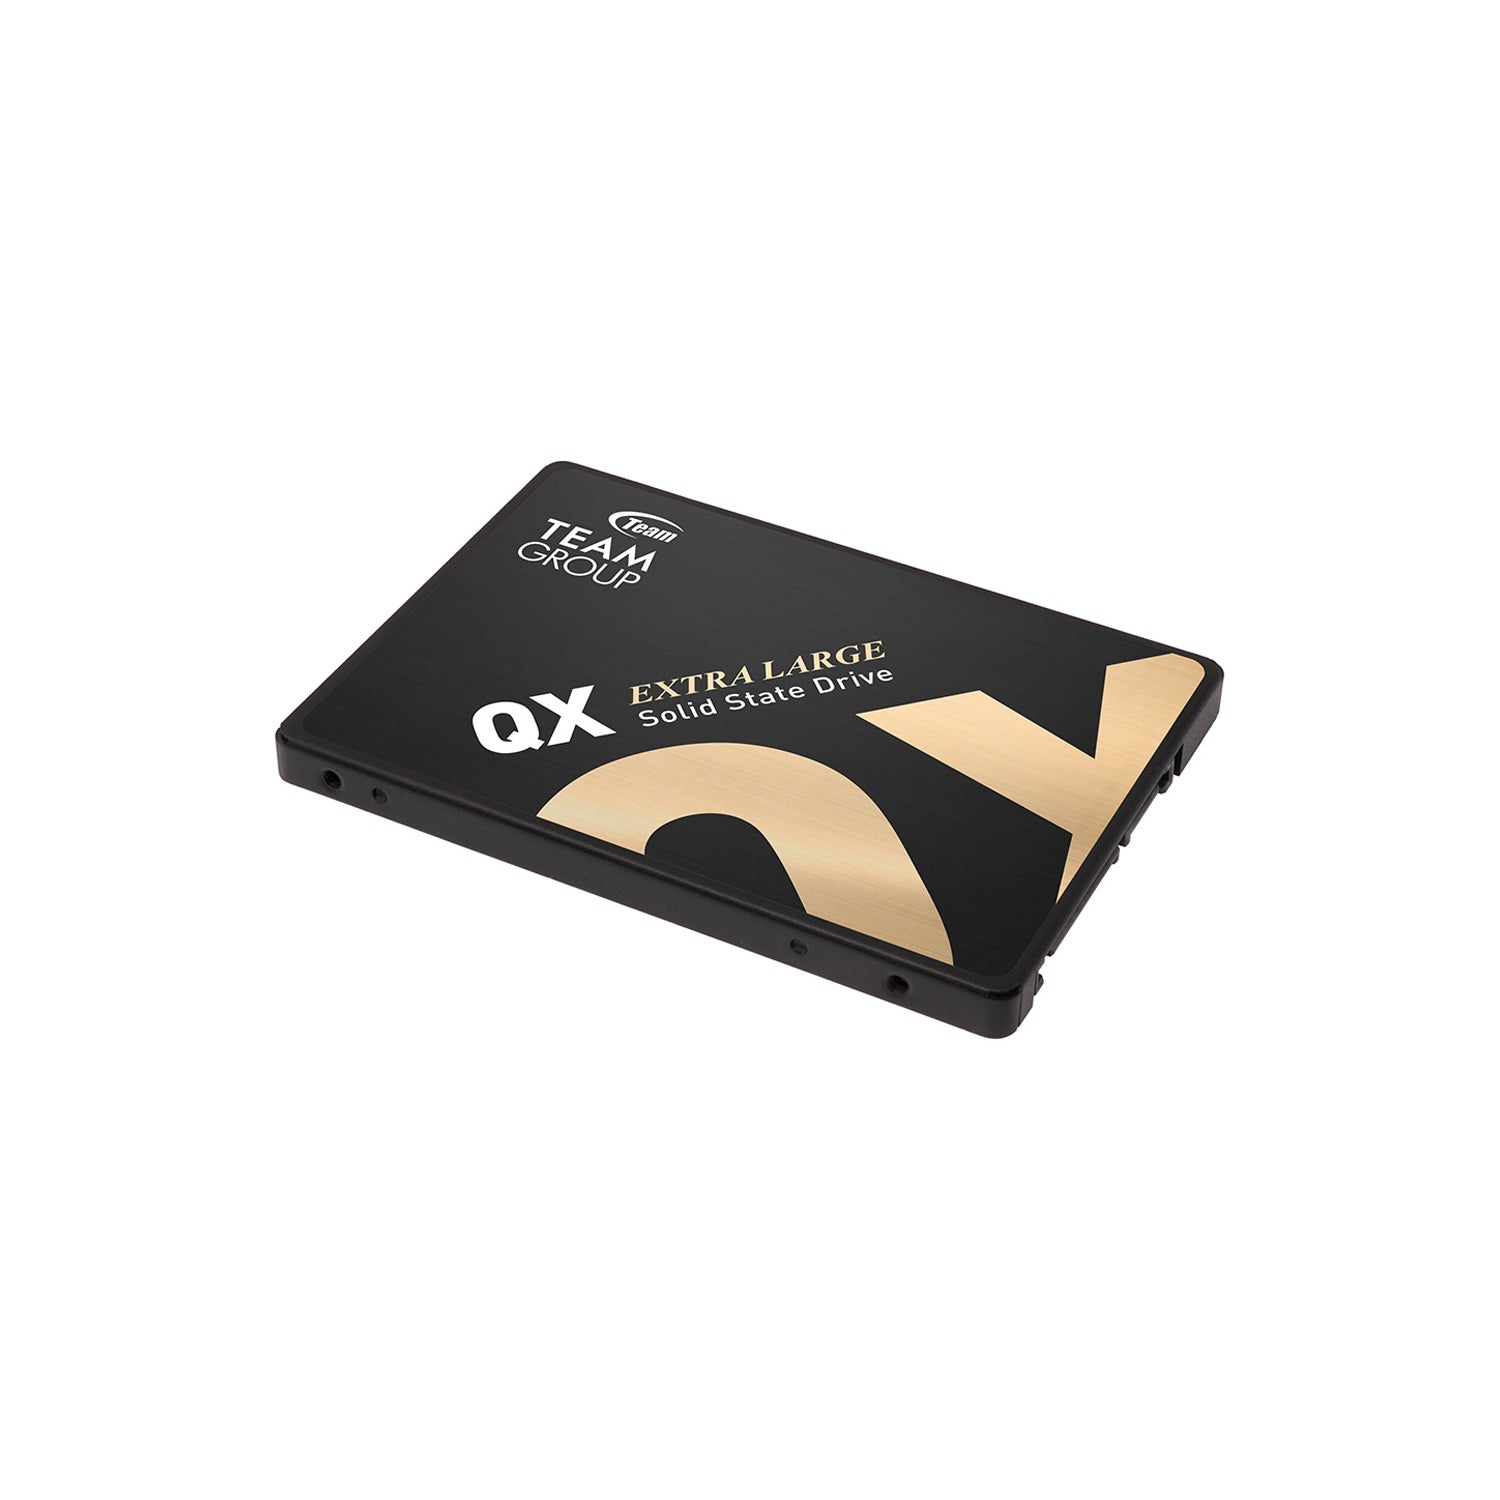 TEAMGROUP QX 2.5"  2TB Extra Large Solid State Drive (SSD) / 3D QLC flash memory / SATA III 6Gb/s Interface / Read speeds up to 540MB/s / Write speeds up to 490MB/s - (T253X7002T0C101)